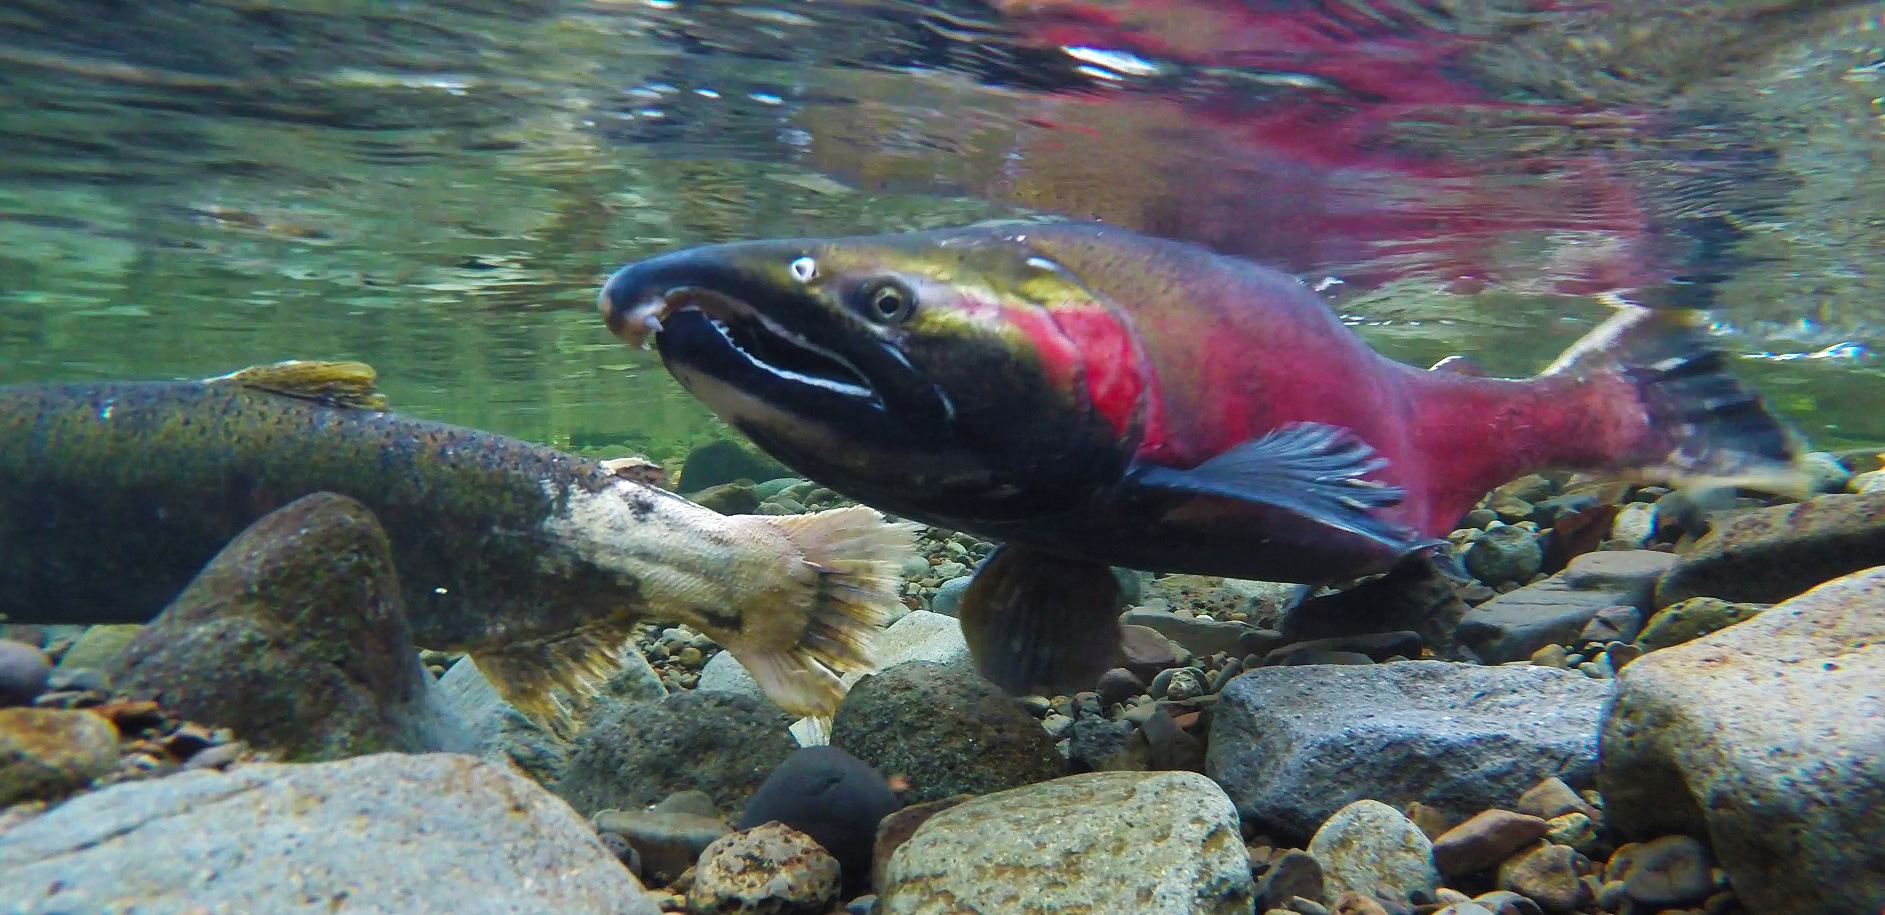 Salmon under water in a river.